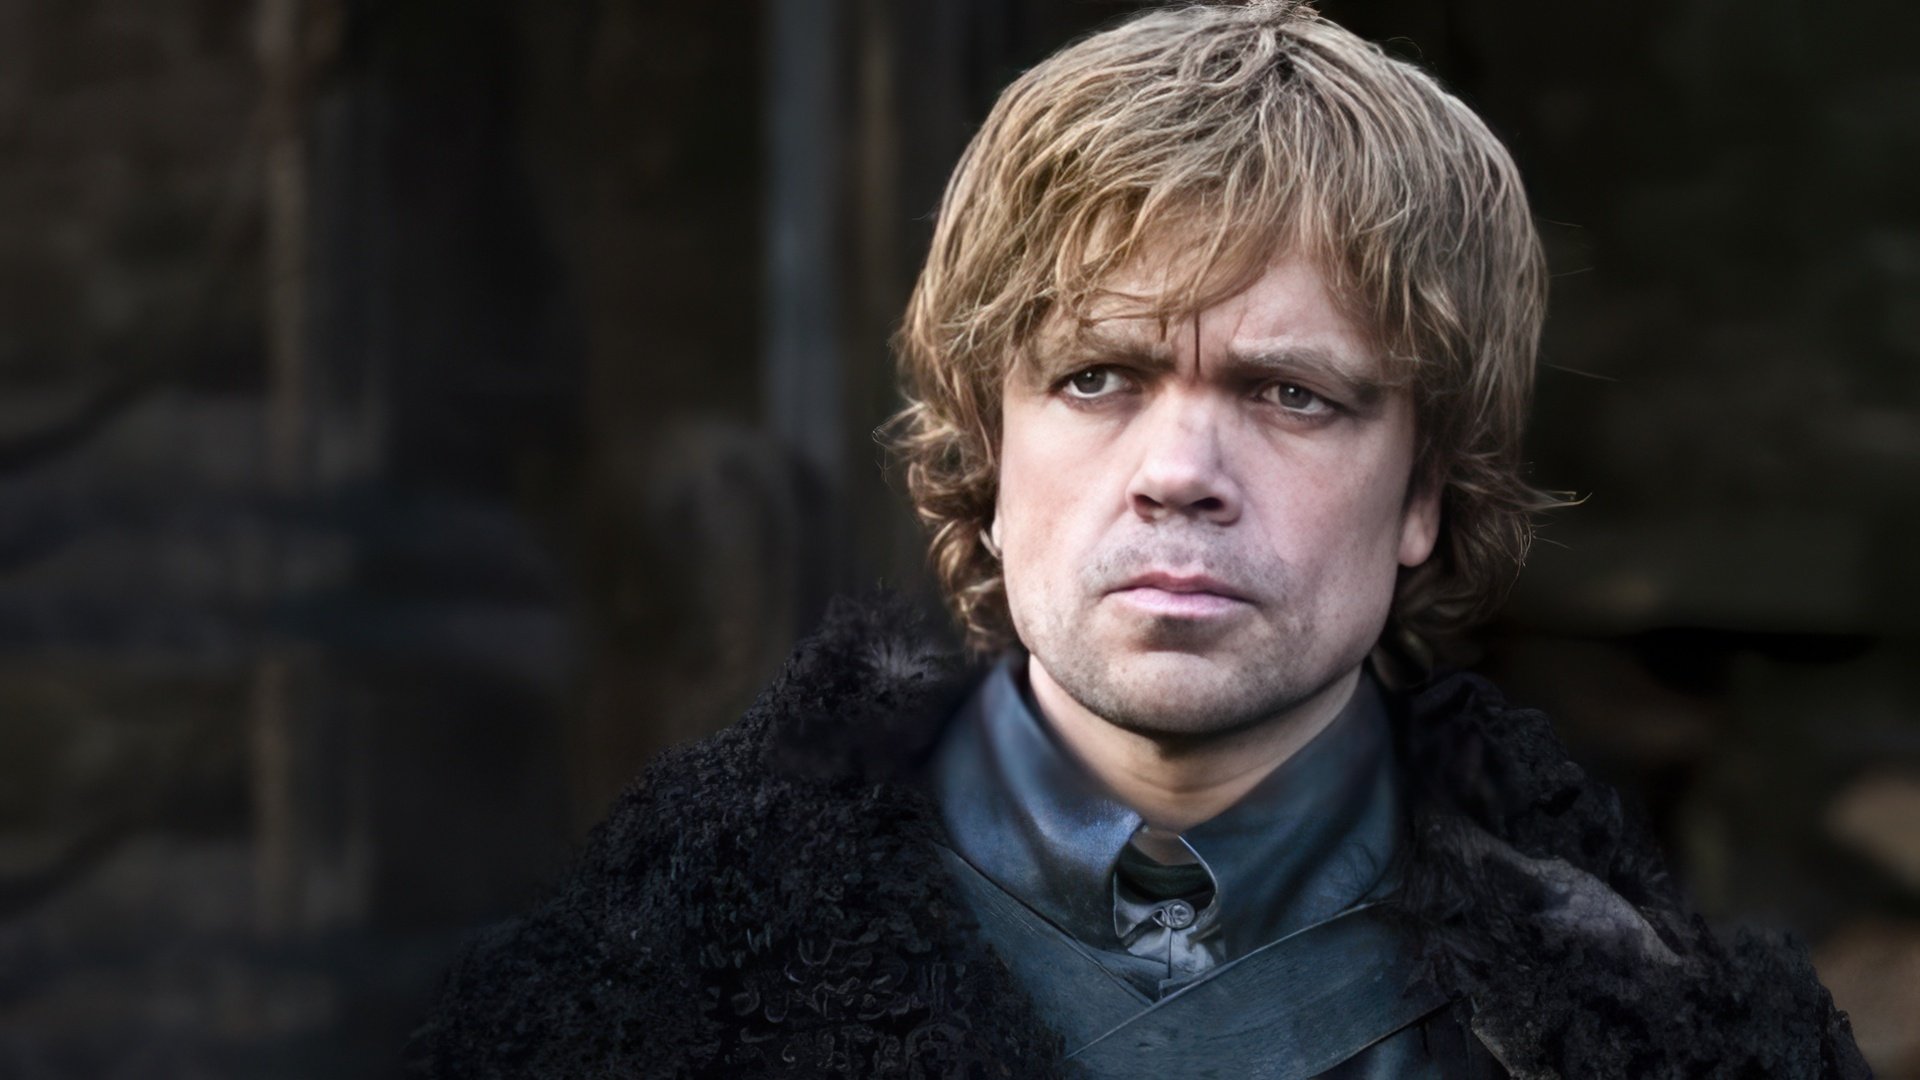 The one and only, Tyrion Lannister – Peter Dinklage